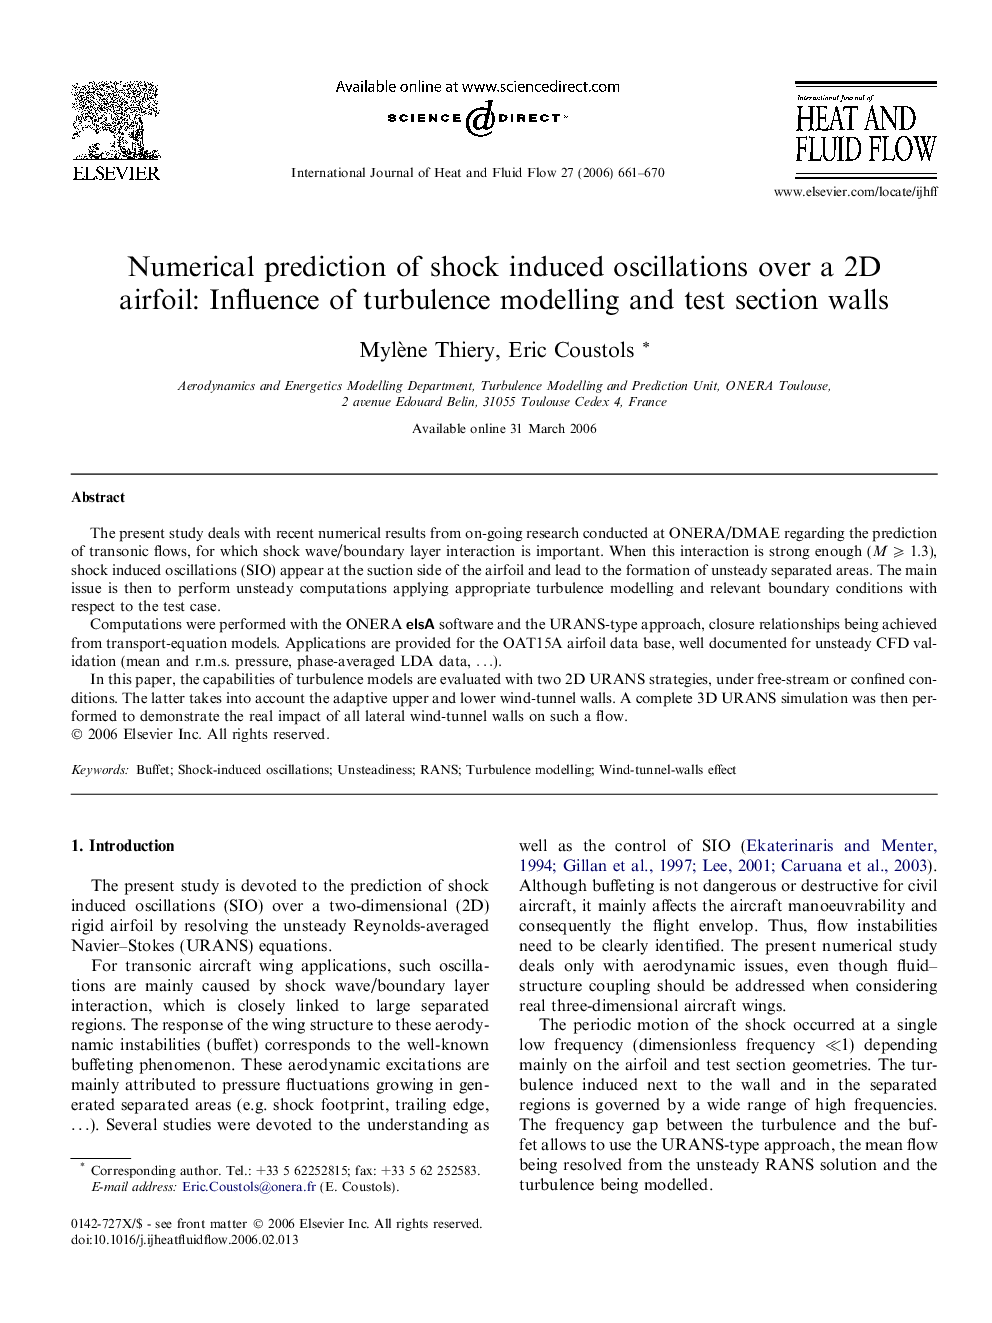 Numerical prediction of shock induced oscillations over a 2D airfoil: Influence of turbulence modelling and test section walls